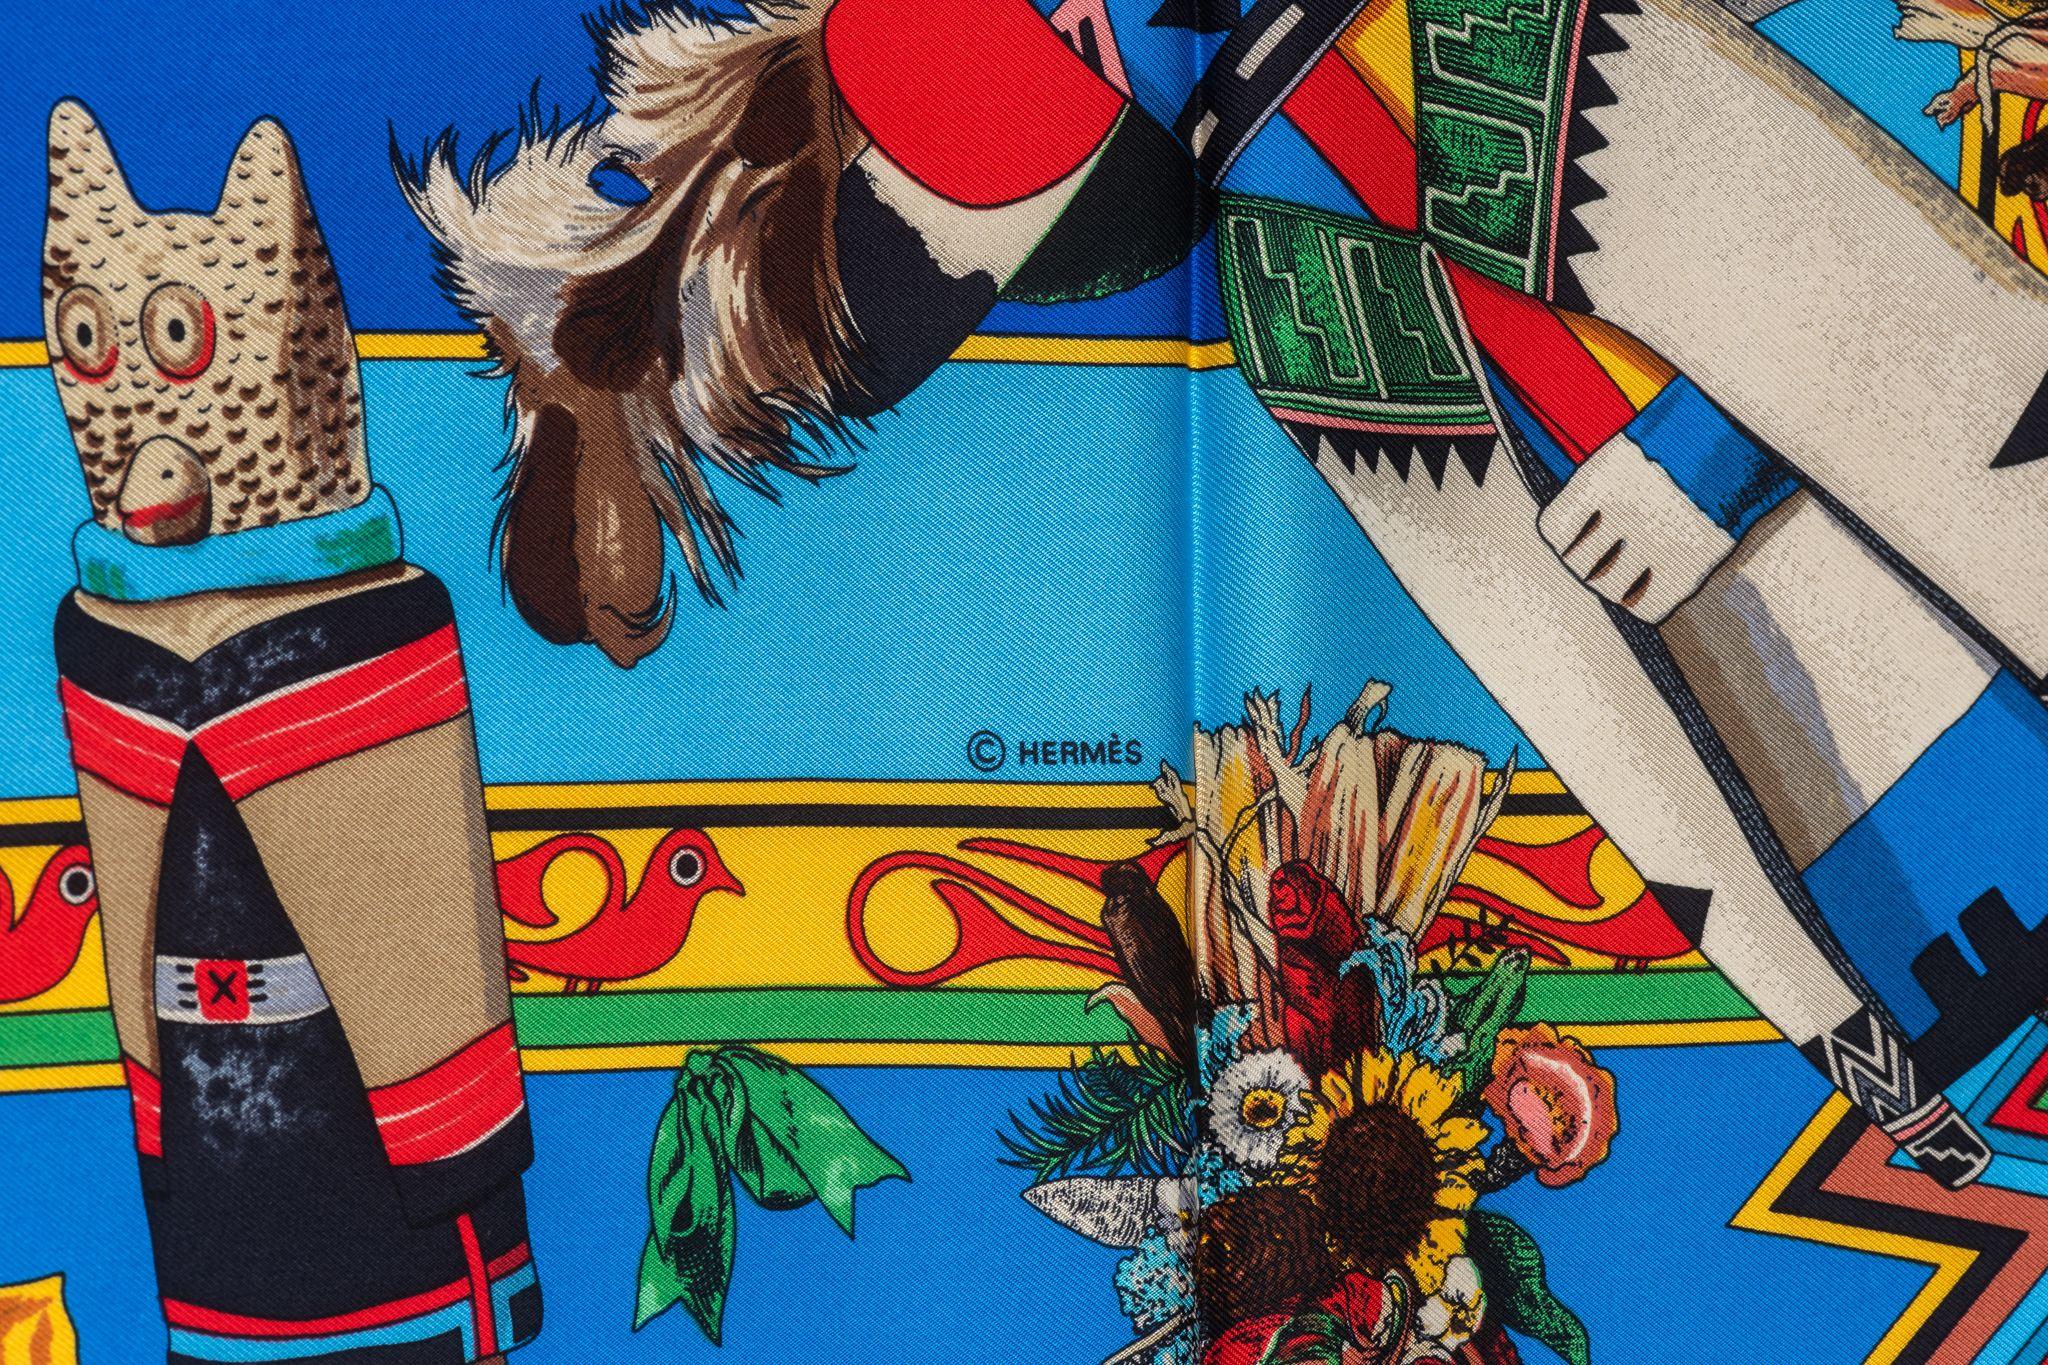 Hermes Rare Turquoise Kachinas Scarf In Excellent Condition For Sale In West Hollywood, CA